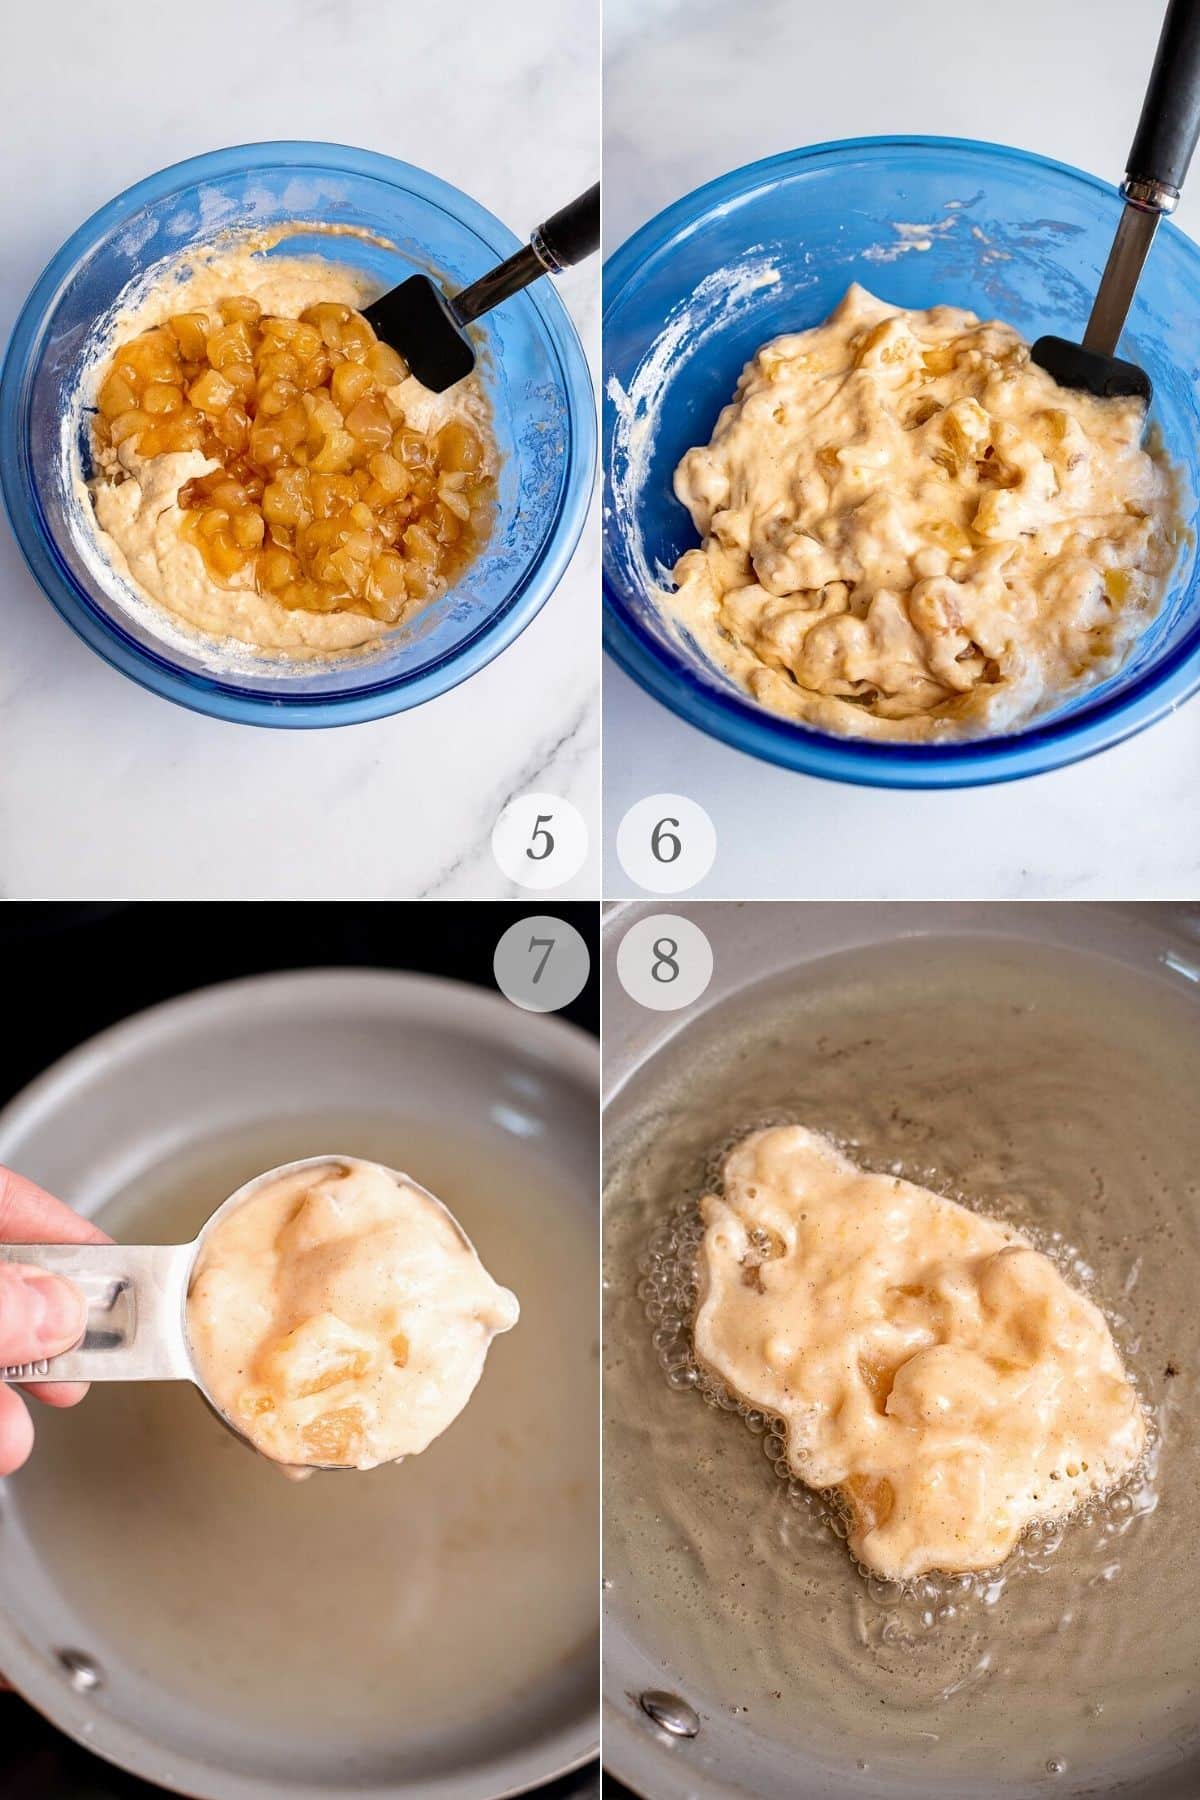 apple fritters recipe steps 5-8 